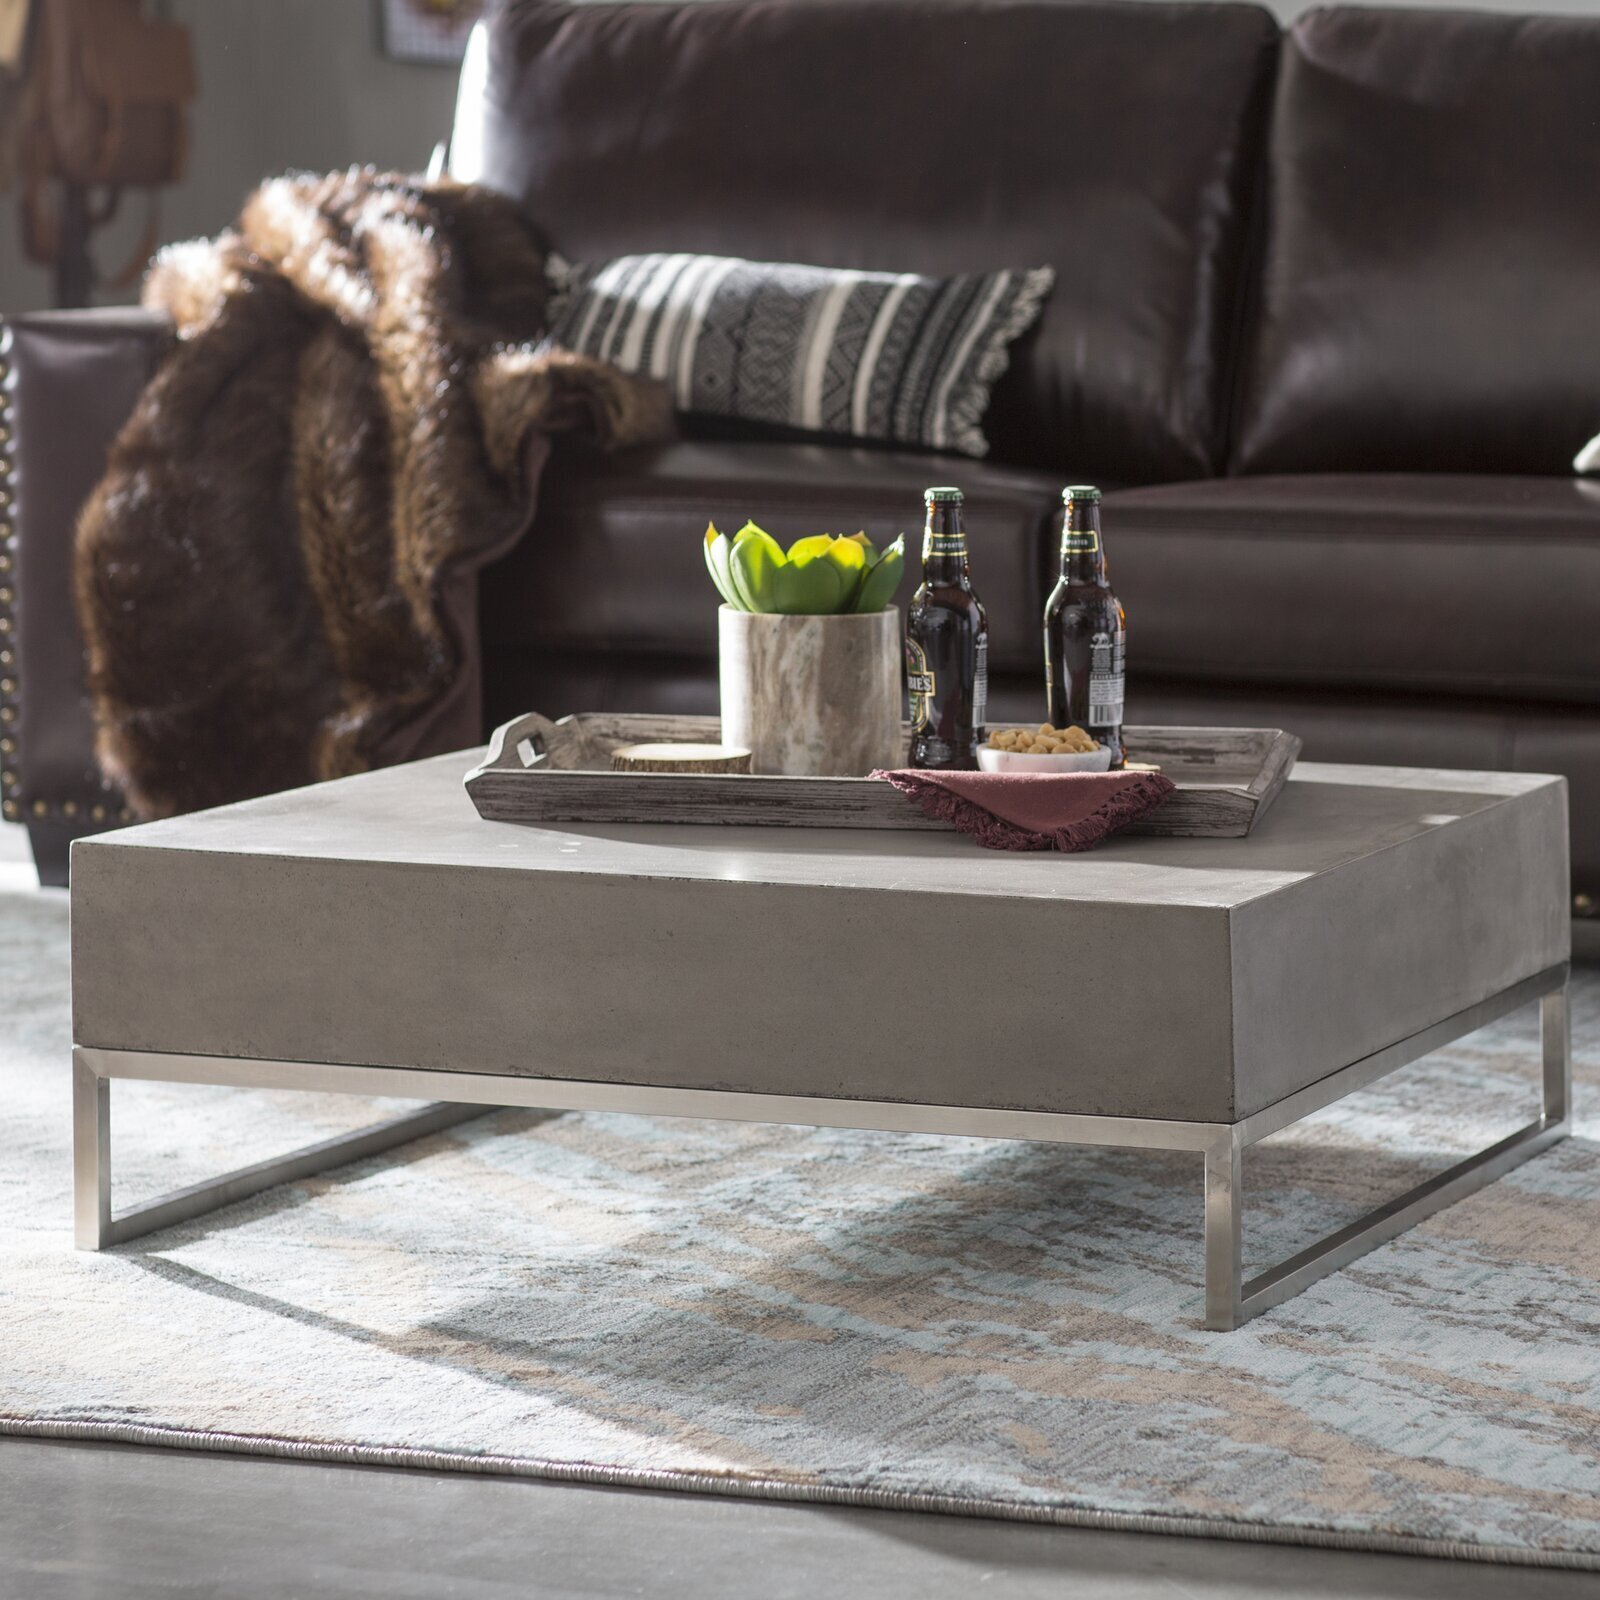 Stainless Steel and Concrete Oversized Square Coffee Table